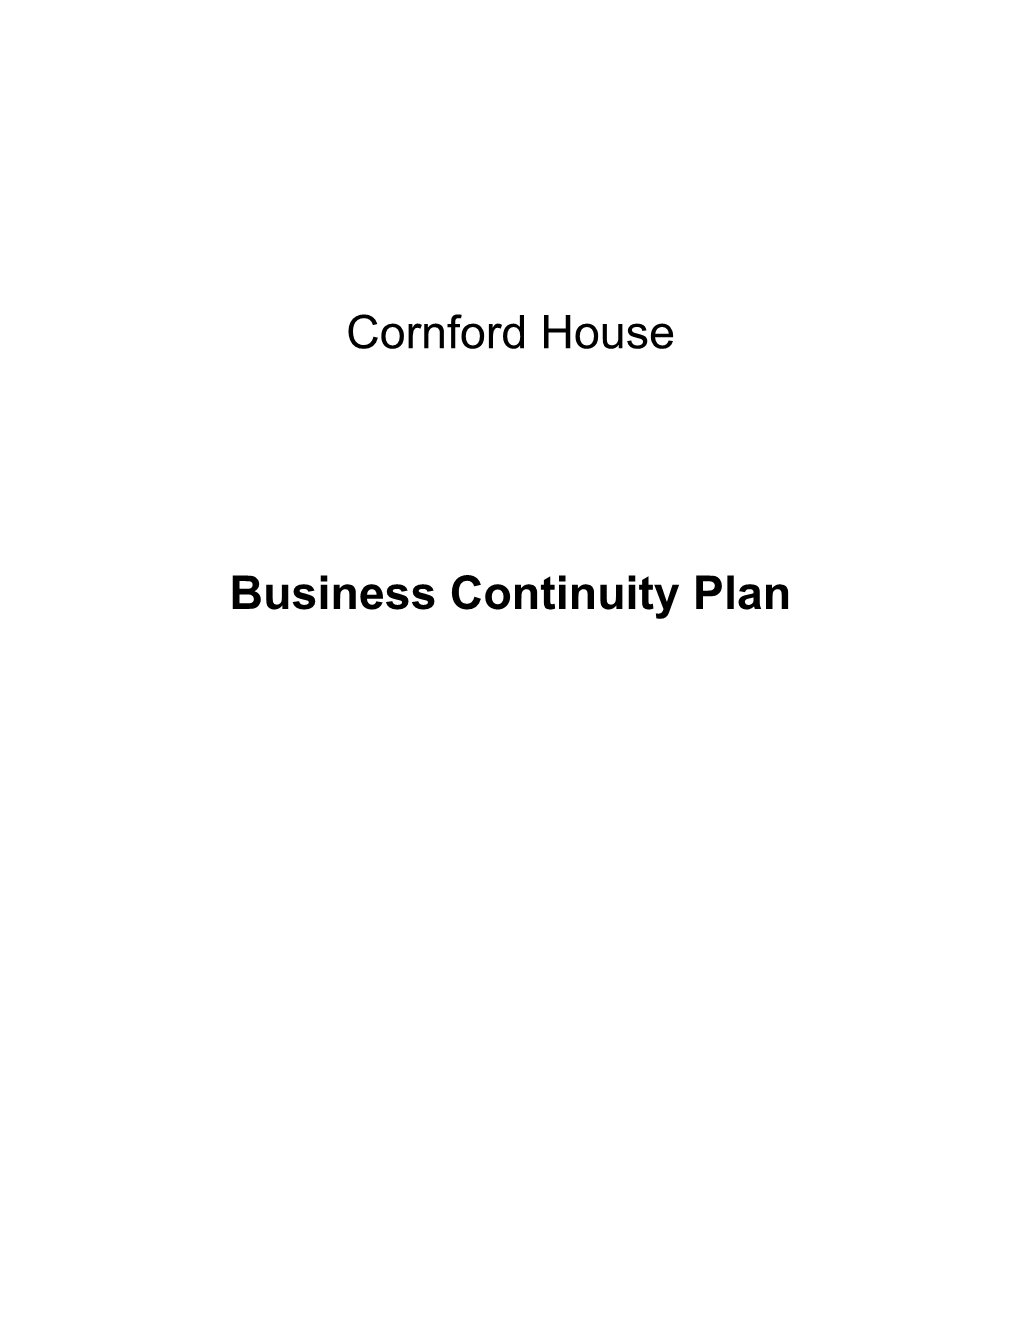 Business Continuity Plan s1